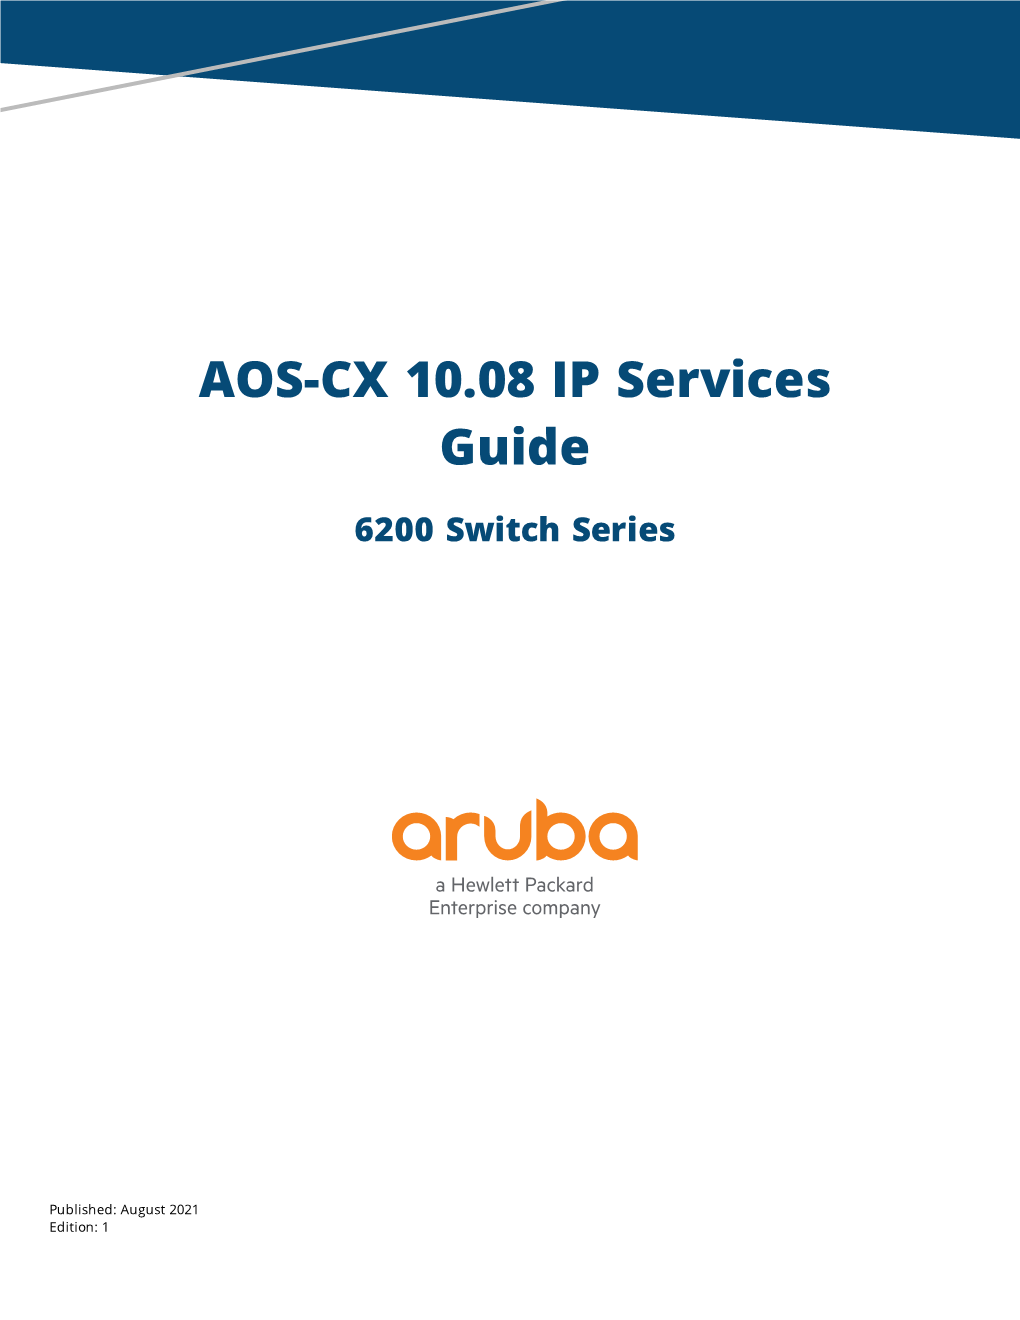 AOS-CX 10.08 IP Services Guide for 6200 Switches